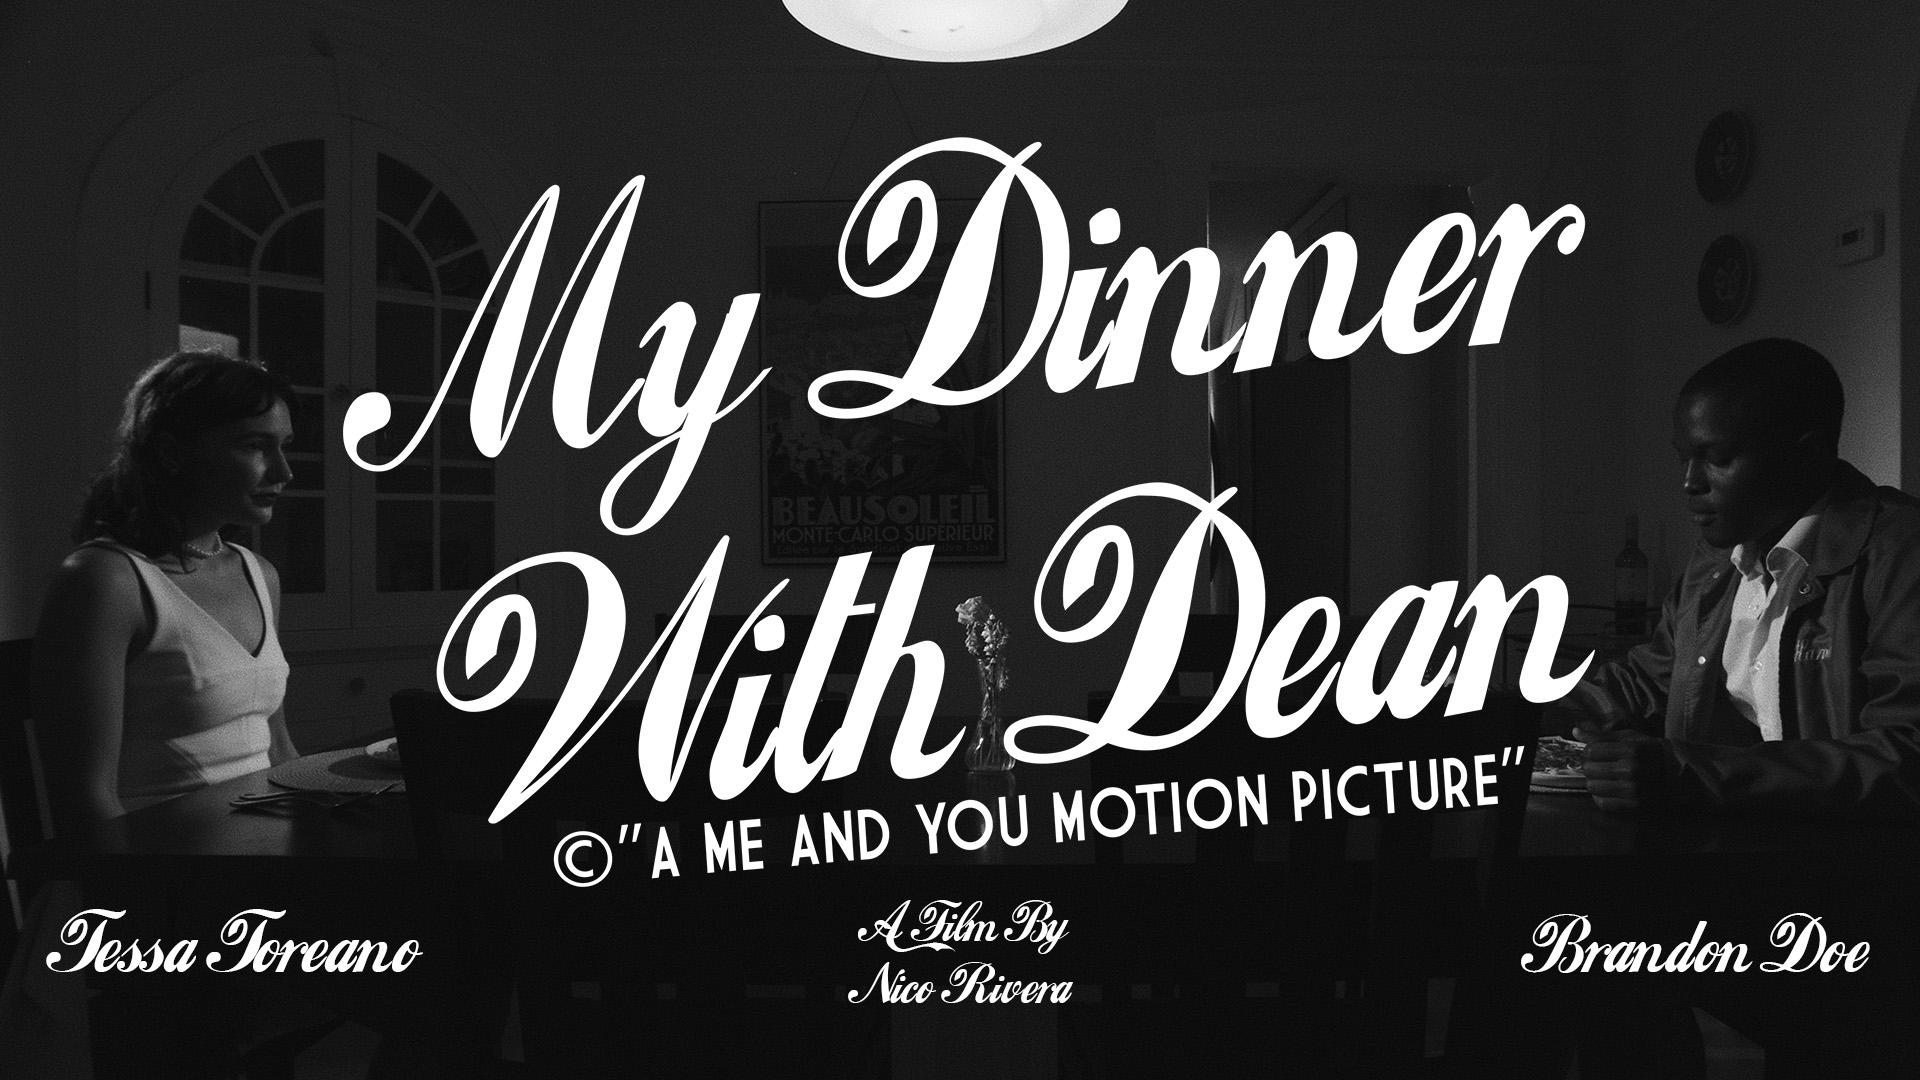 "My Dinner With Dean"